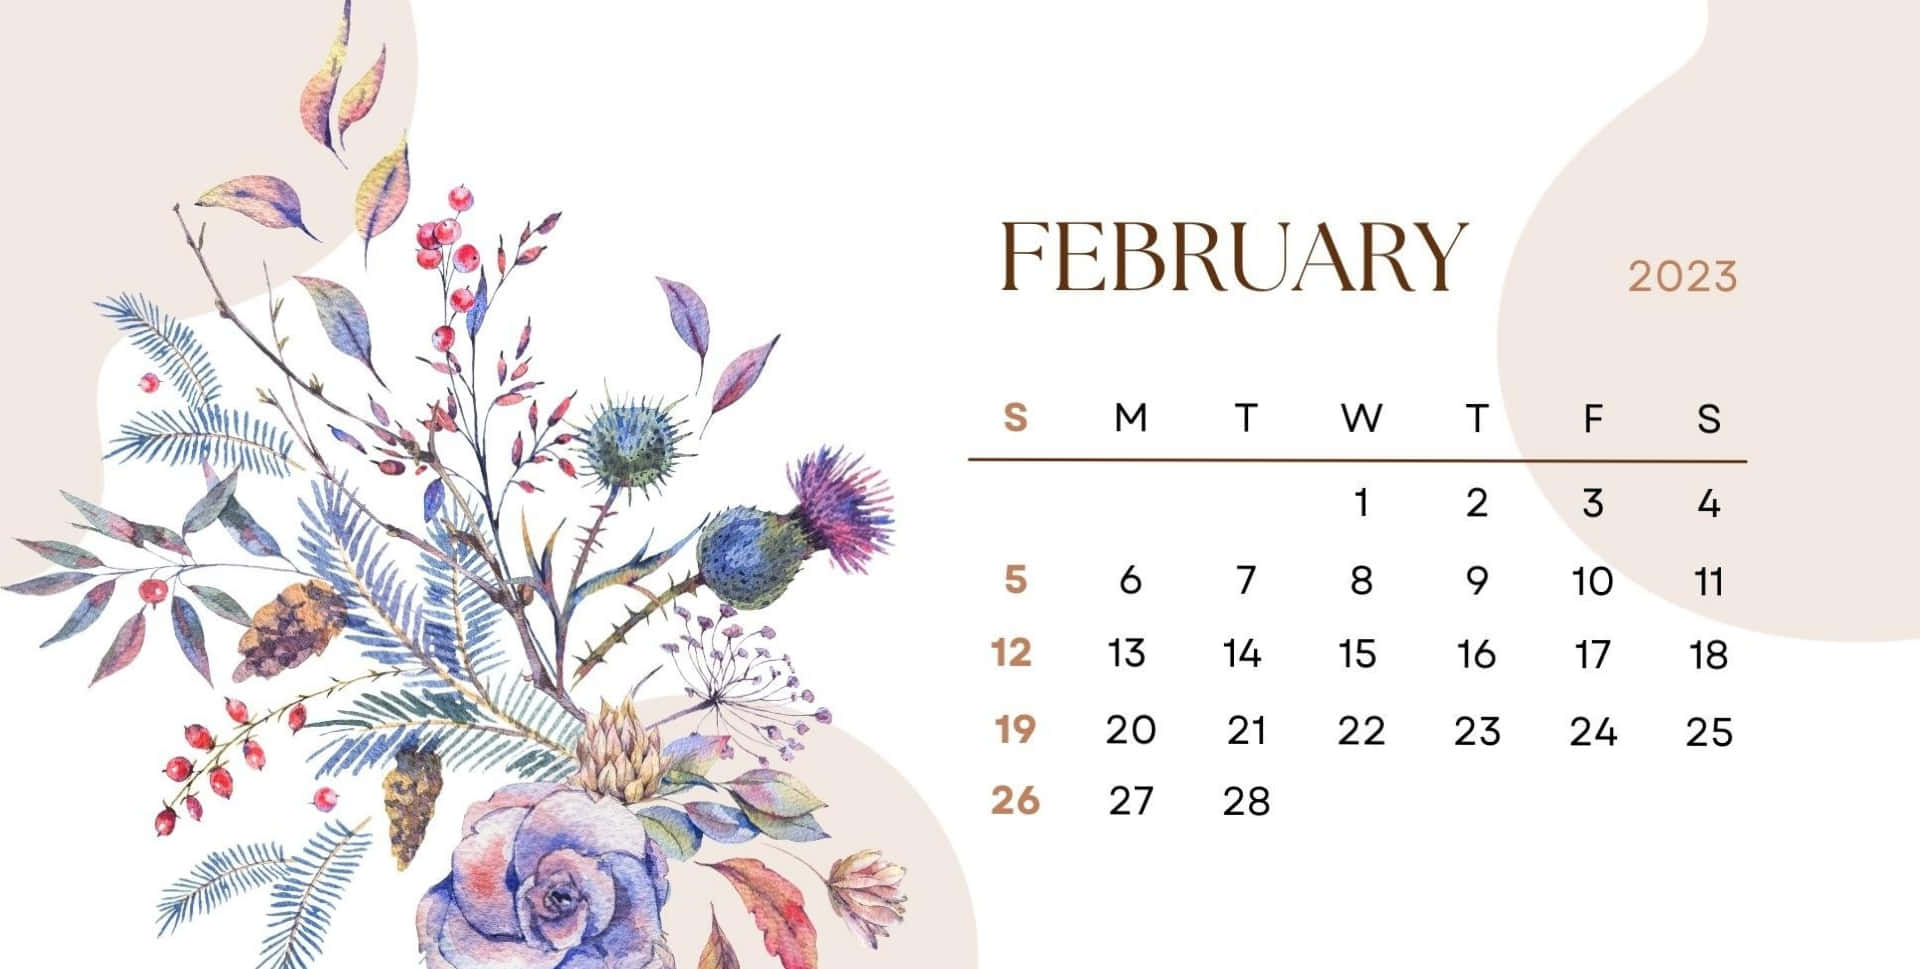 "Plan your February in Advance" Wallpaper